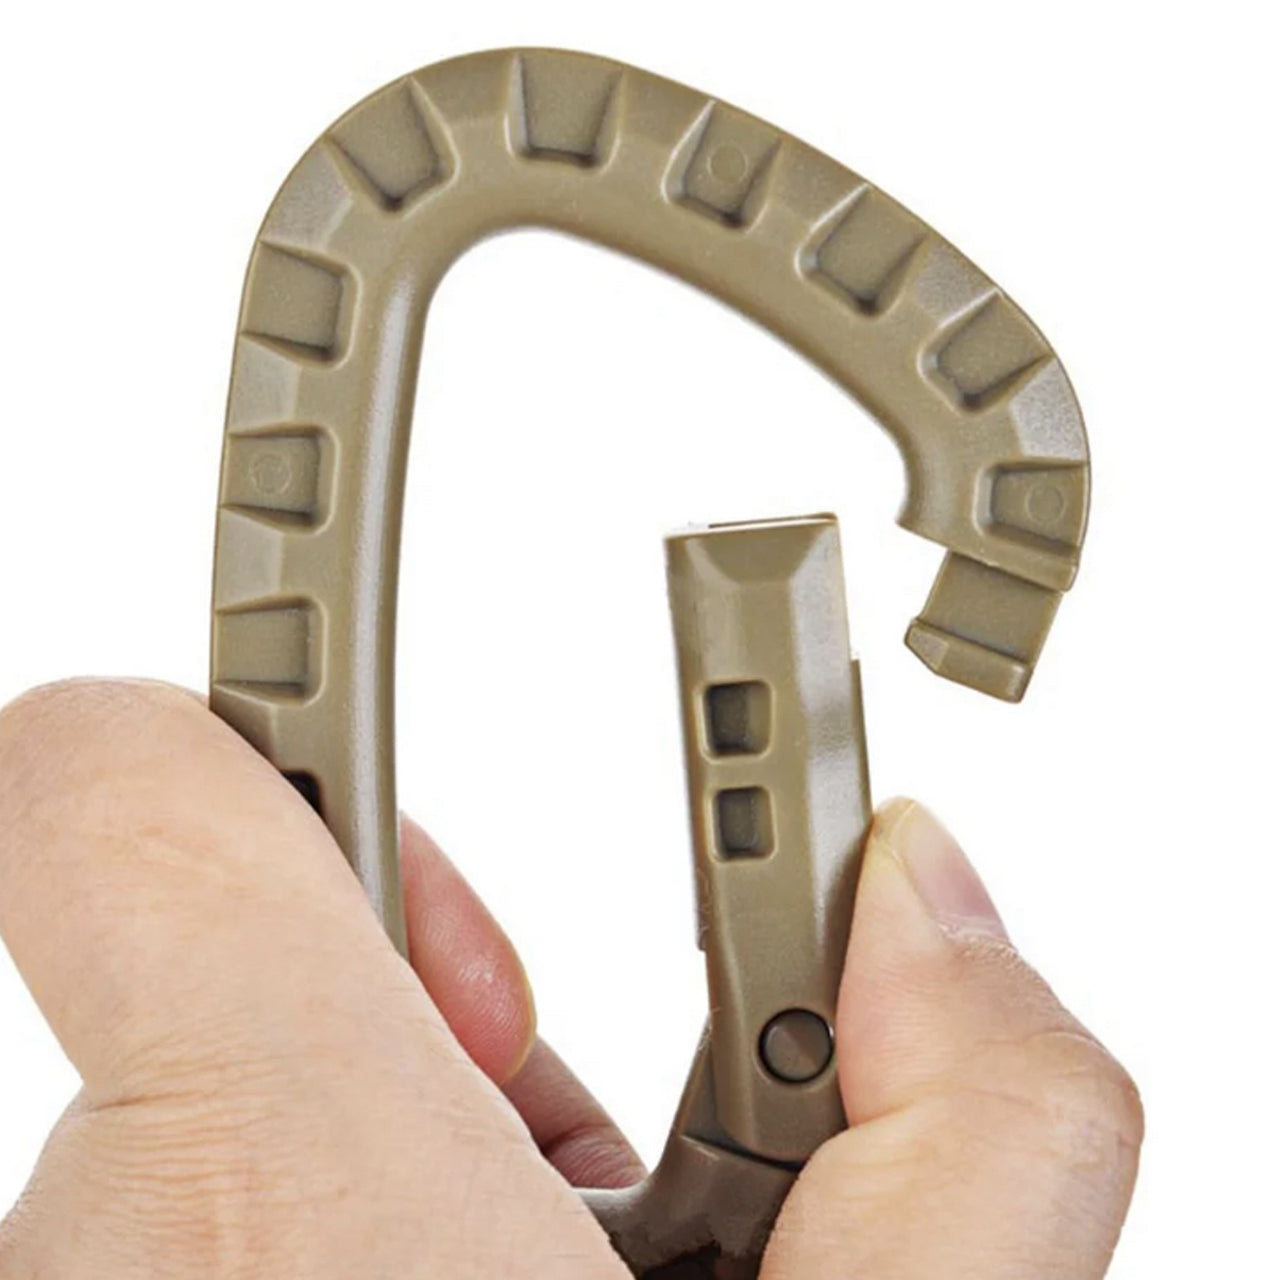 These firm carabiners are very practical and helpful equipment items. The hanging and securing of equipment works easy. Material: ABS plastic Anti-sliding design Weight: 45g www.defenceqstore.com.au